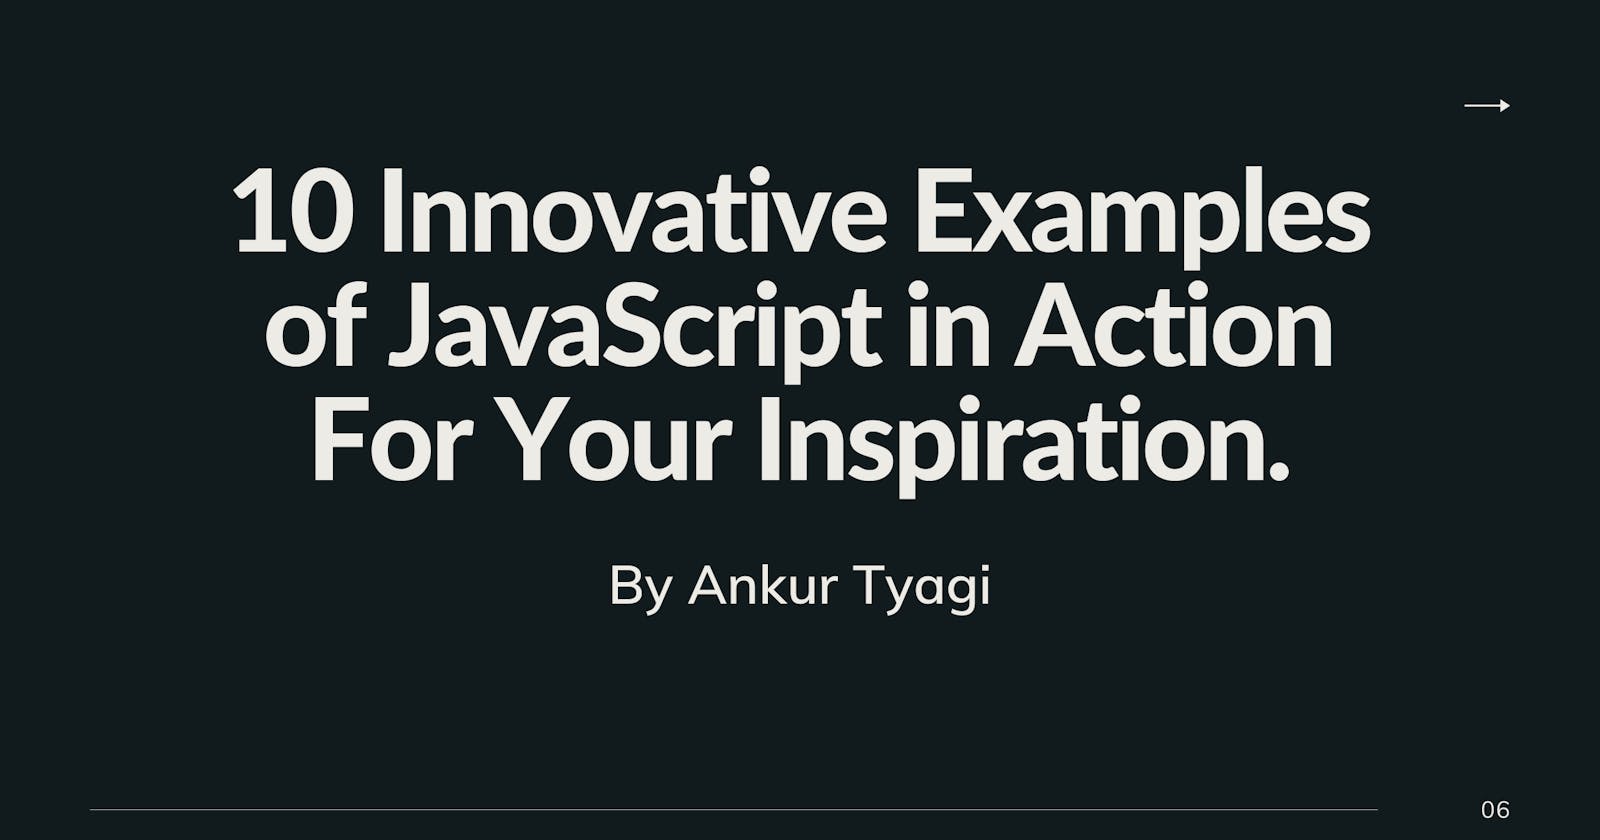 10 Innovative Examples of JavaScript in Action For Your Inspiration.